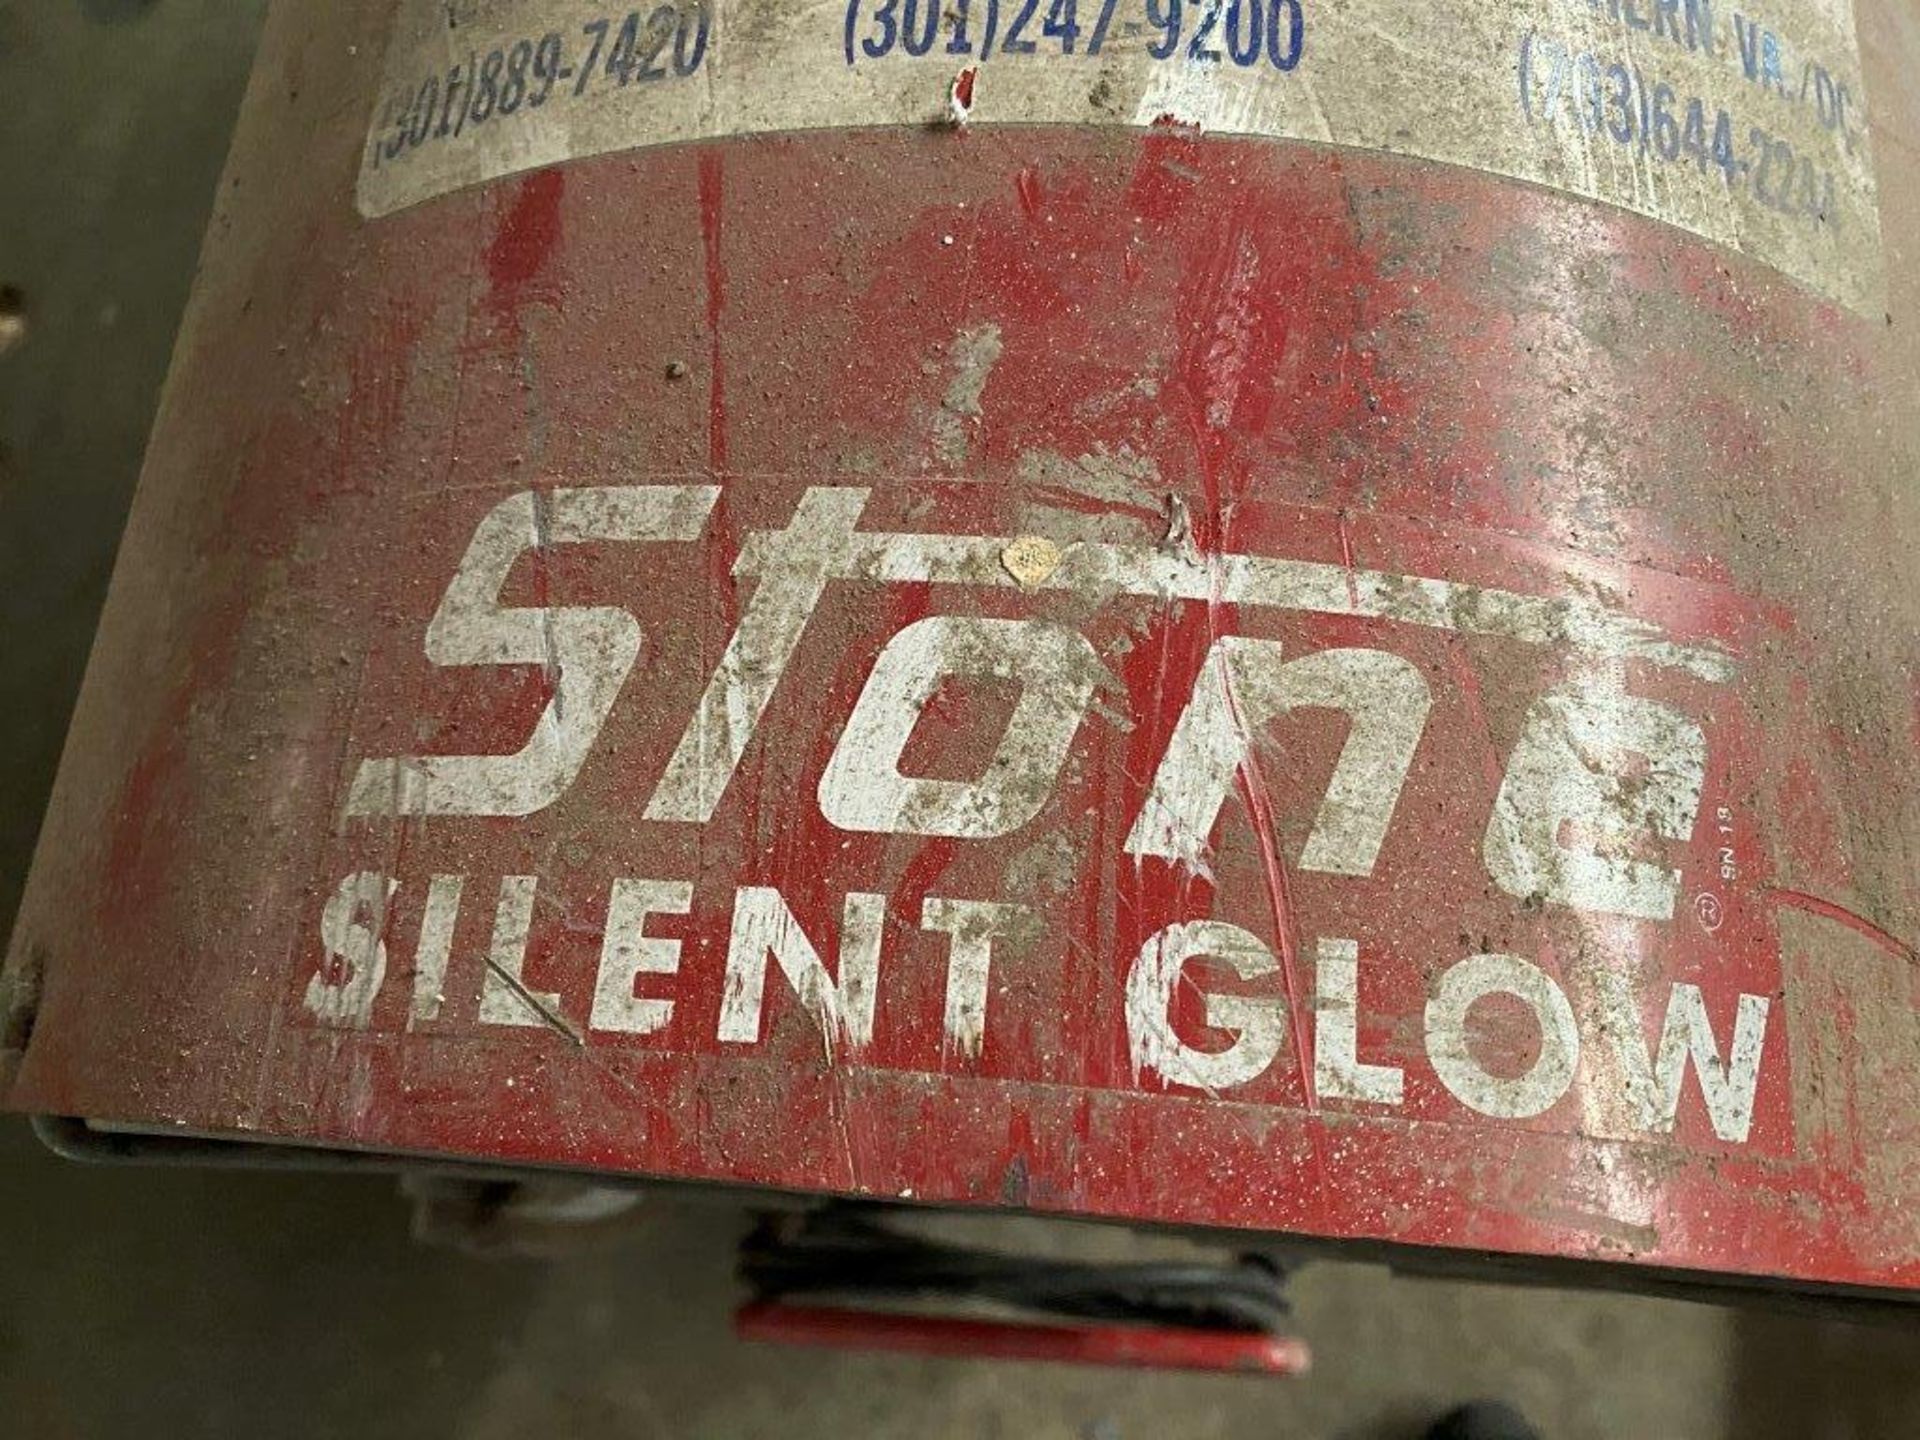 Stone Silent Glow Heater SG 300 - Image 3 of 6